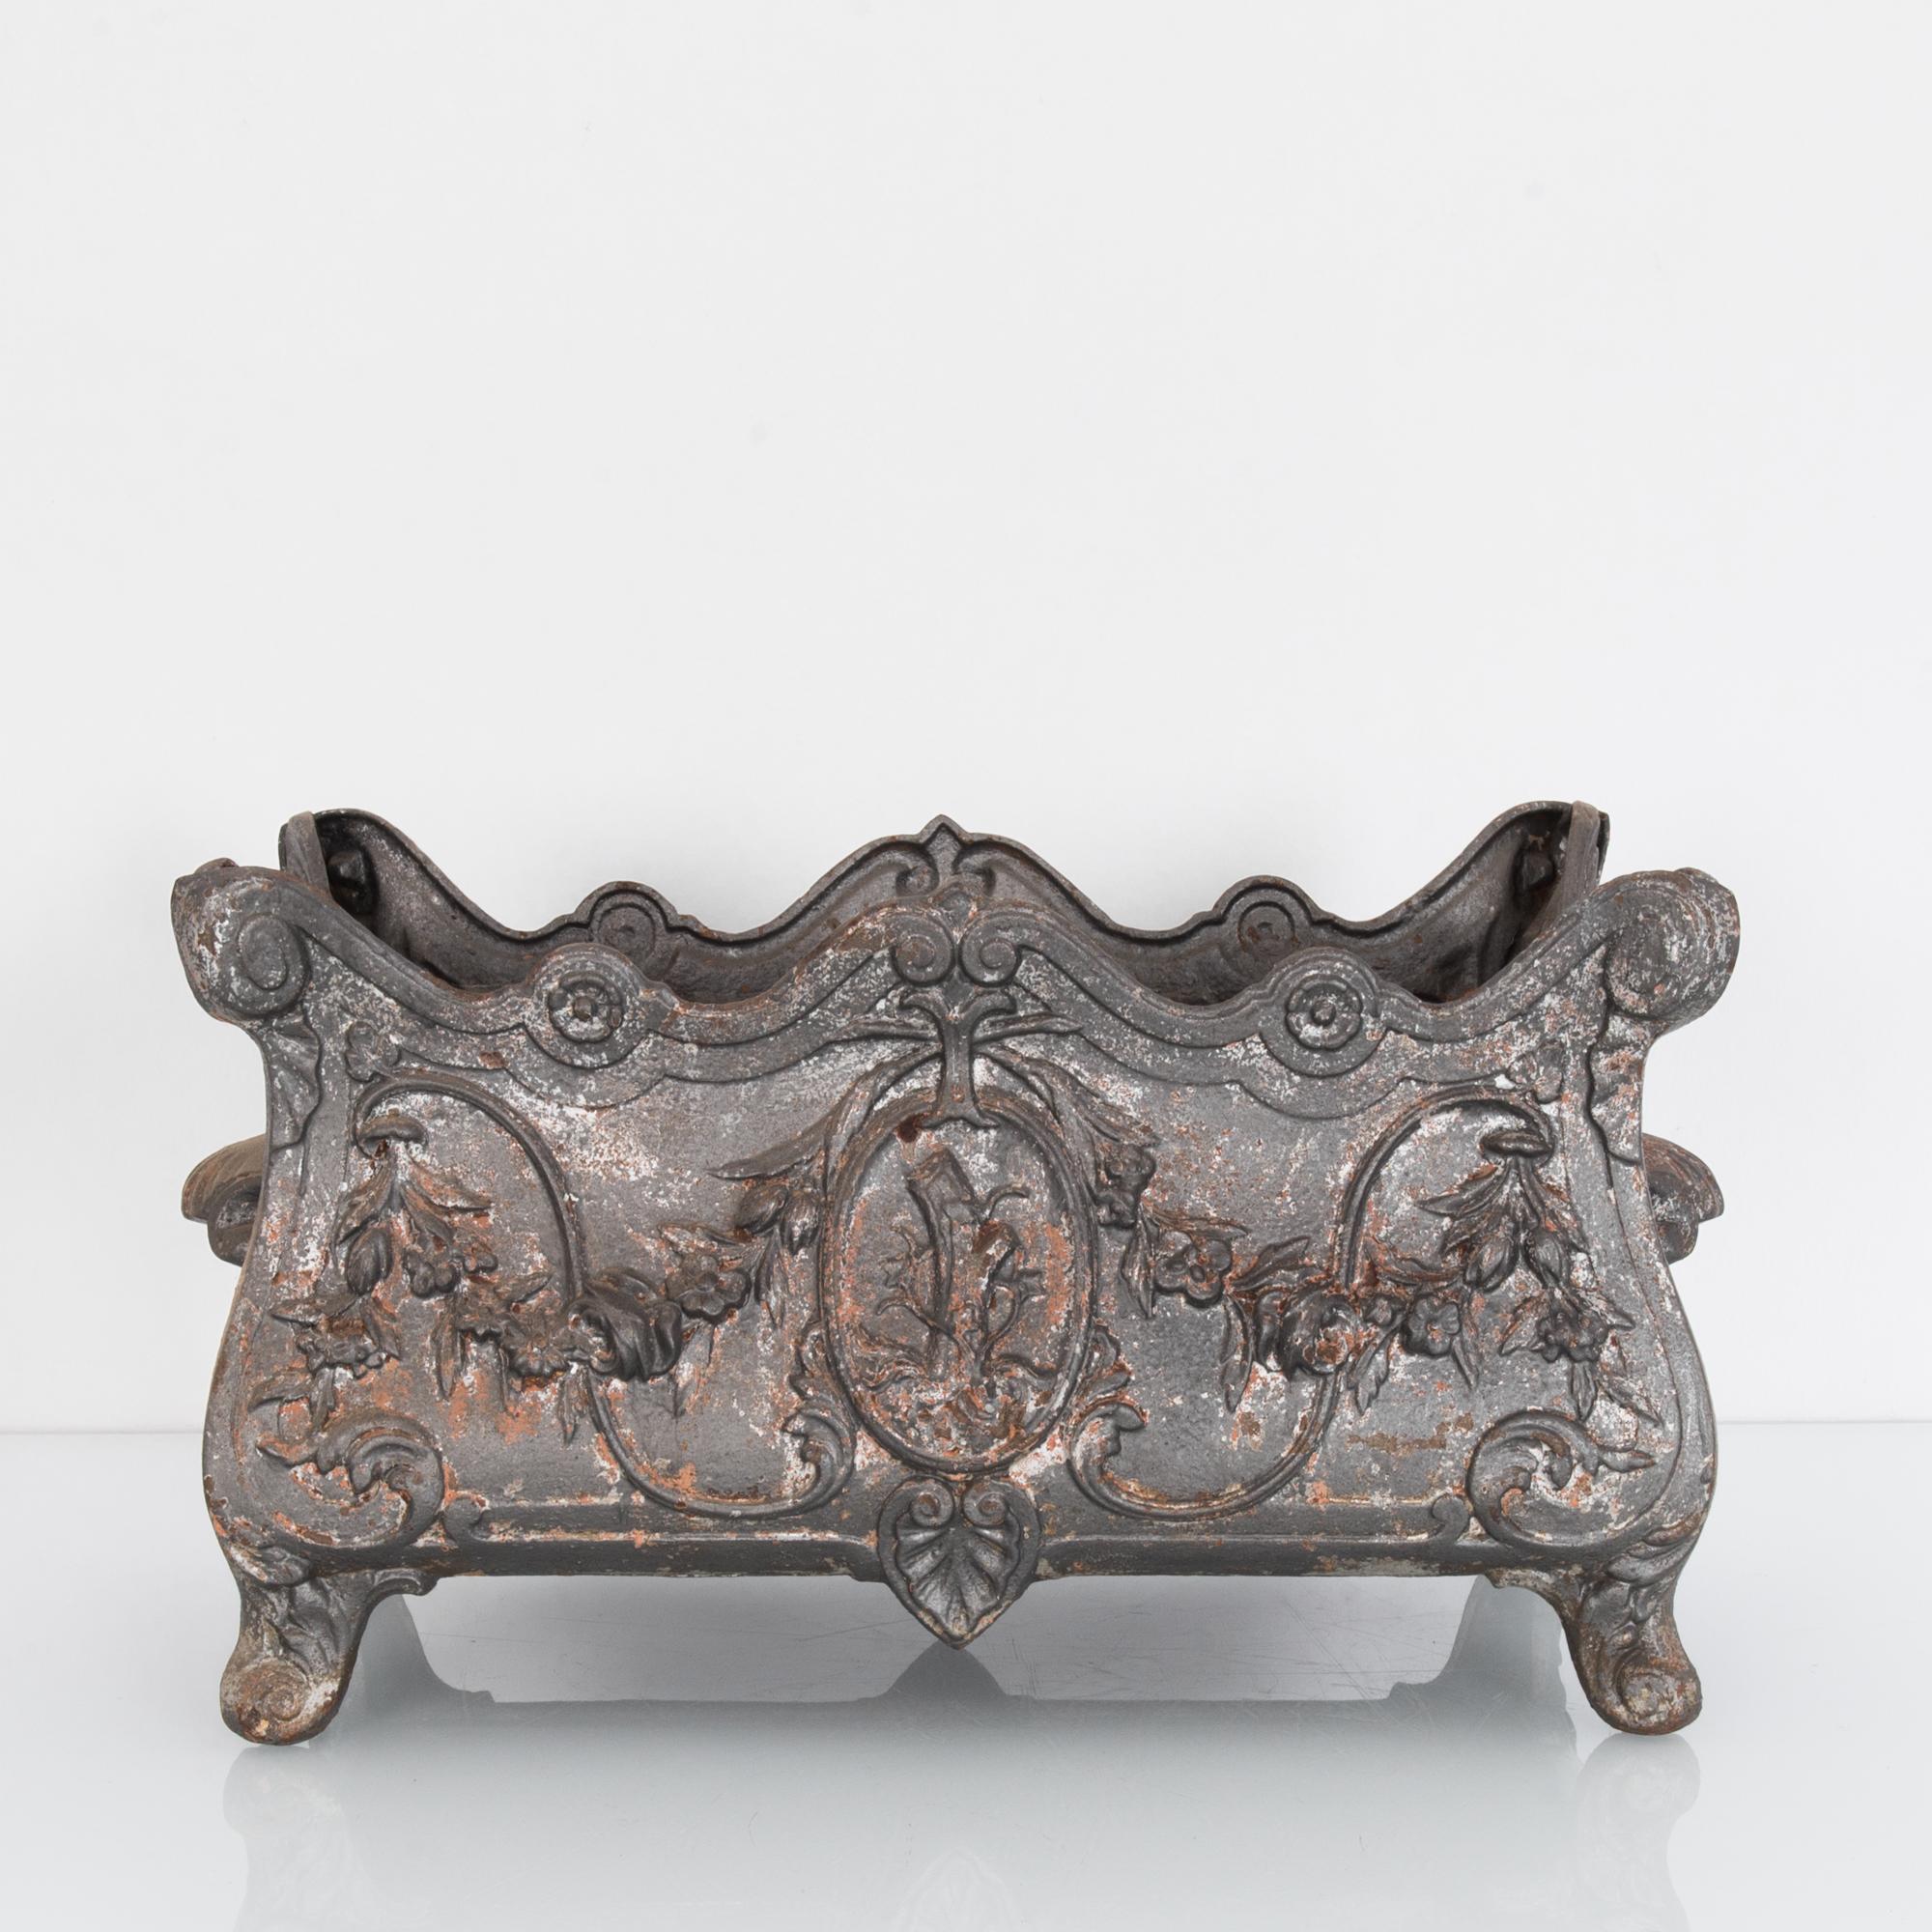 A vintage cast iron planter from 1950s France, with a distinctly Rococo silhouette. A gently serpentine trough with scrolled and scalloped edges sits upon raised feet, and features elaborate embellishment; flowers, leaves, shells and rosettes. A